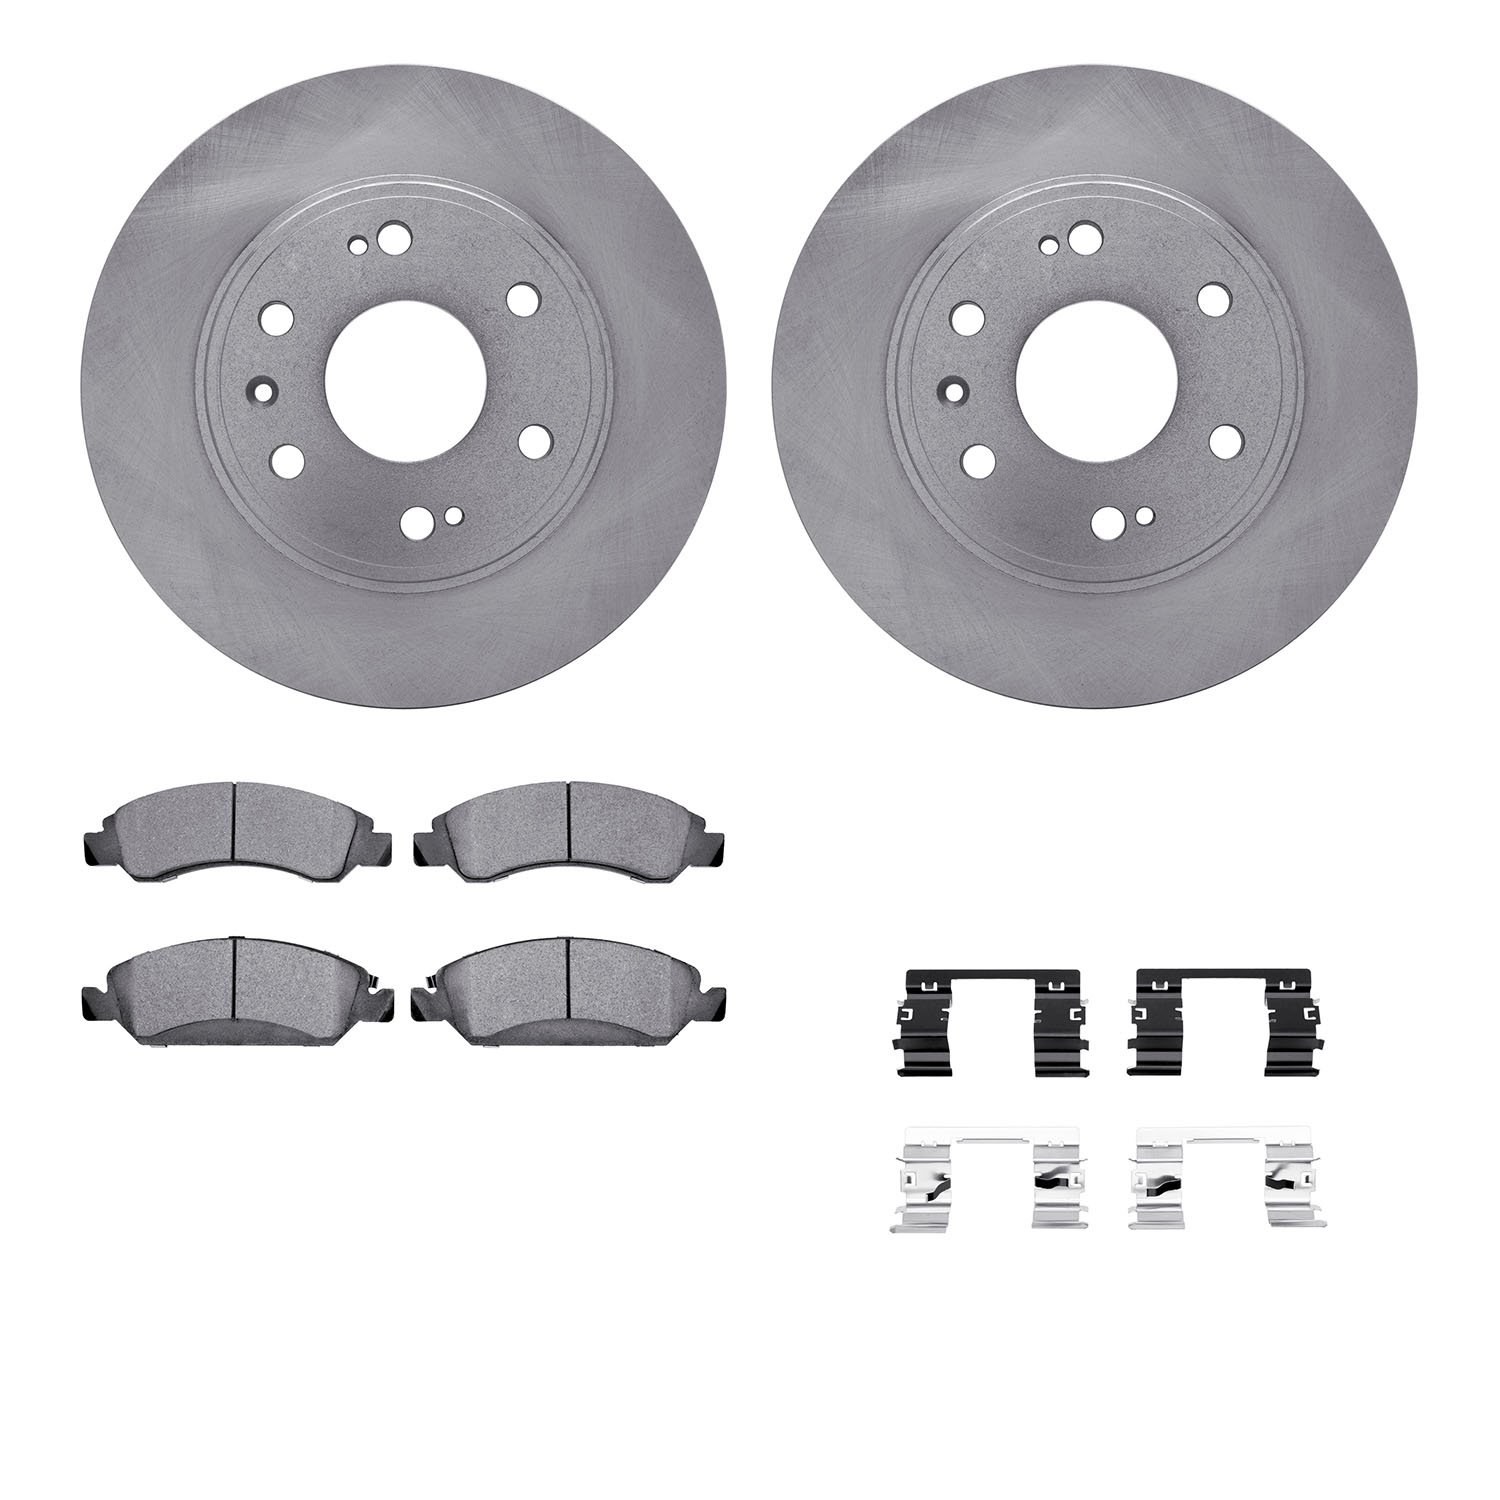 6412-48151 Brake Rotors with Ultimate-Duty Brake Pads Kit & Hardware, 2009-2020 GM, Position: Front